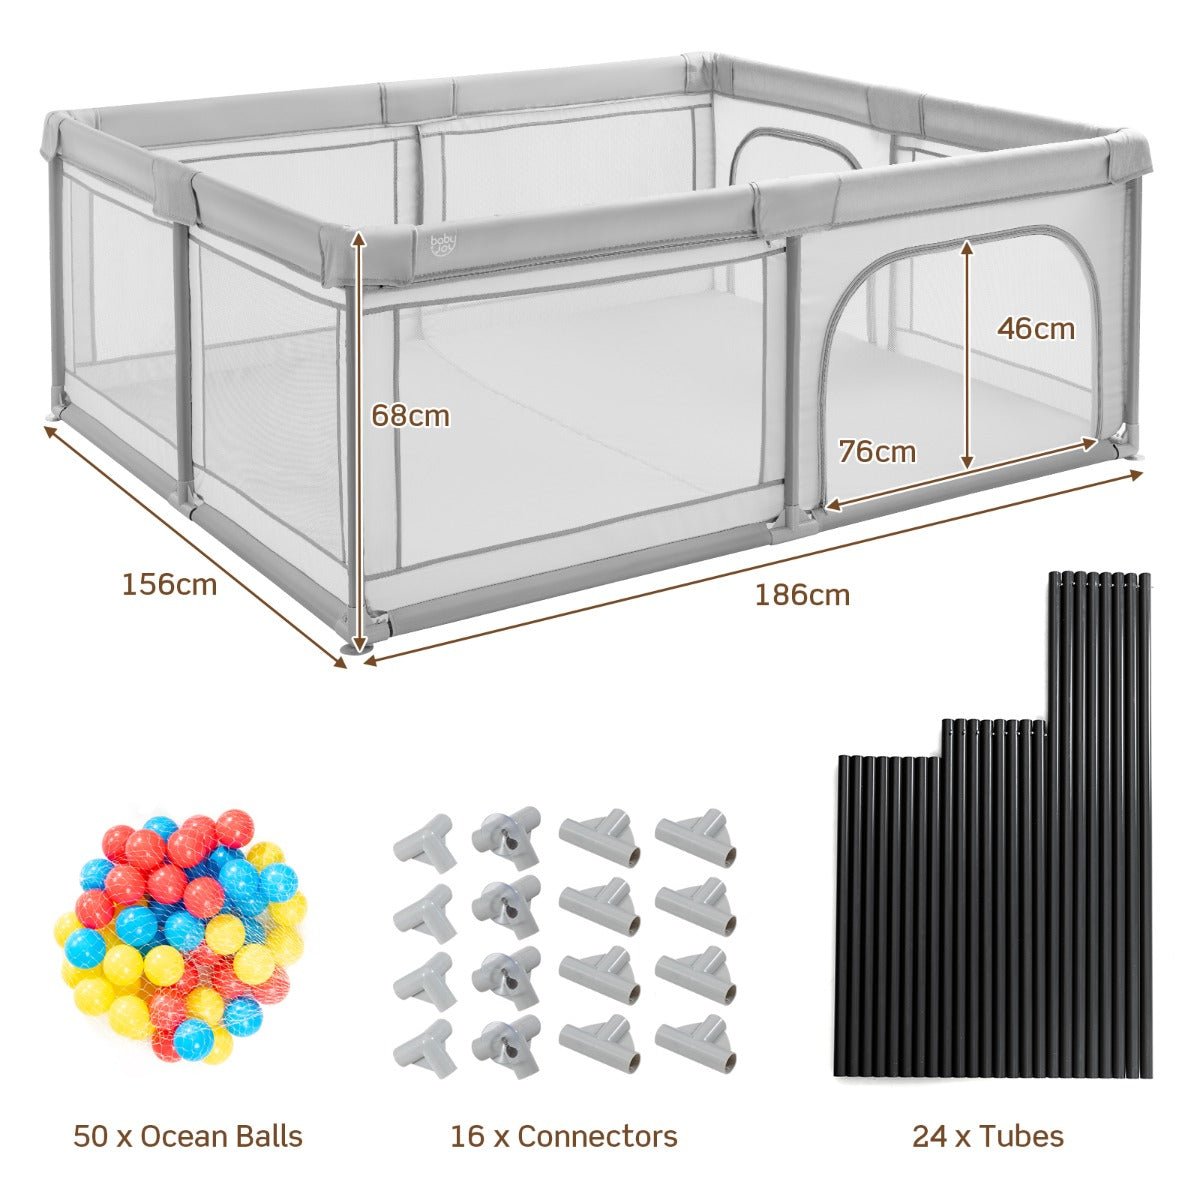 1.8m Baby Playpen with Ocean Ball Pit: Extra Large Play Yard for Infants and Toddlers